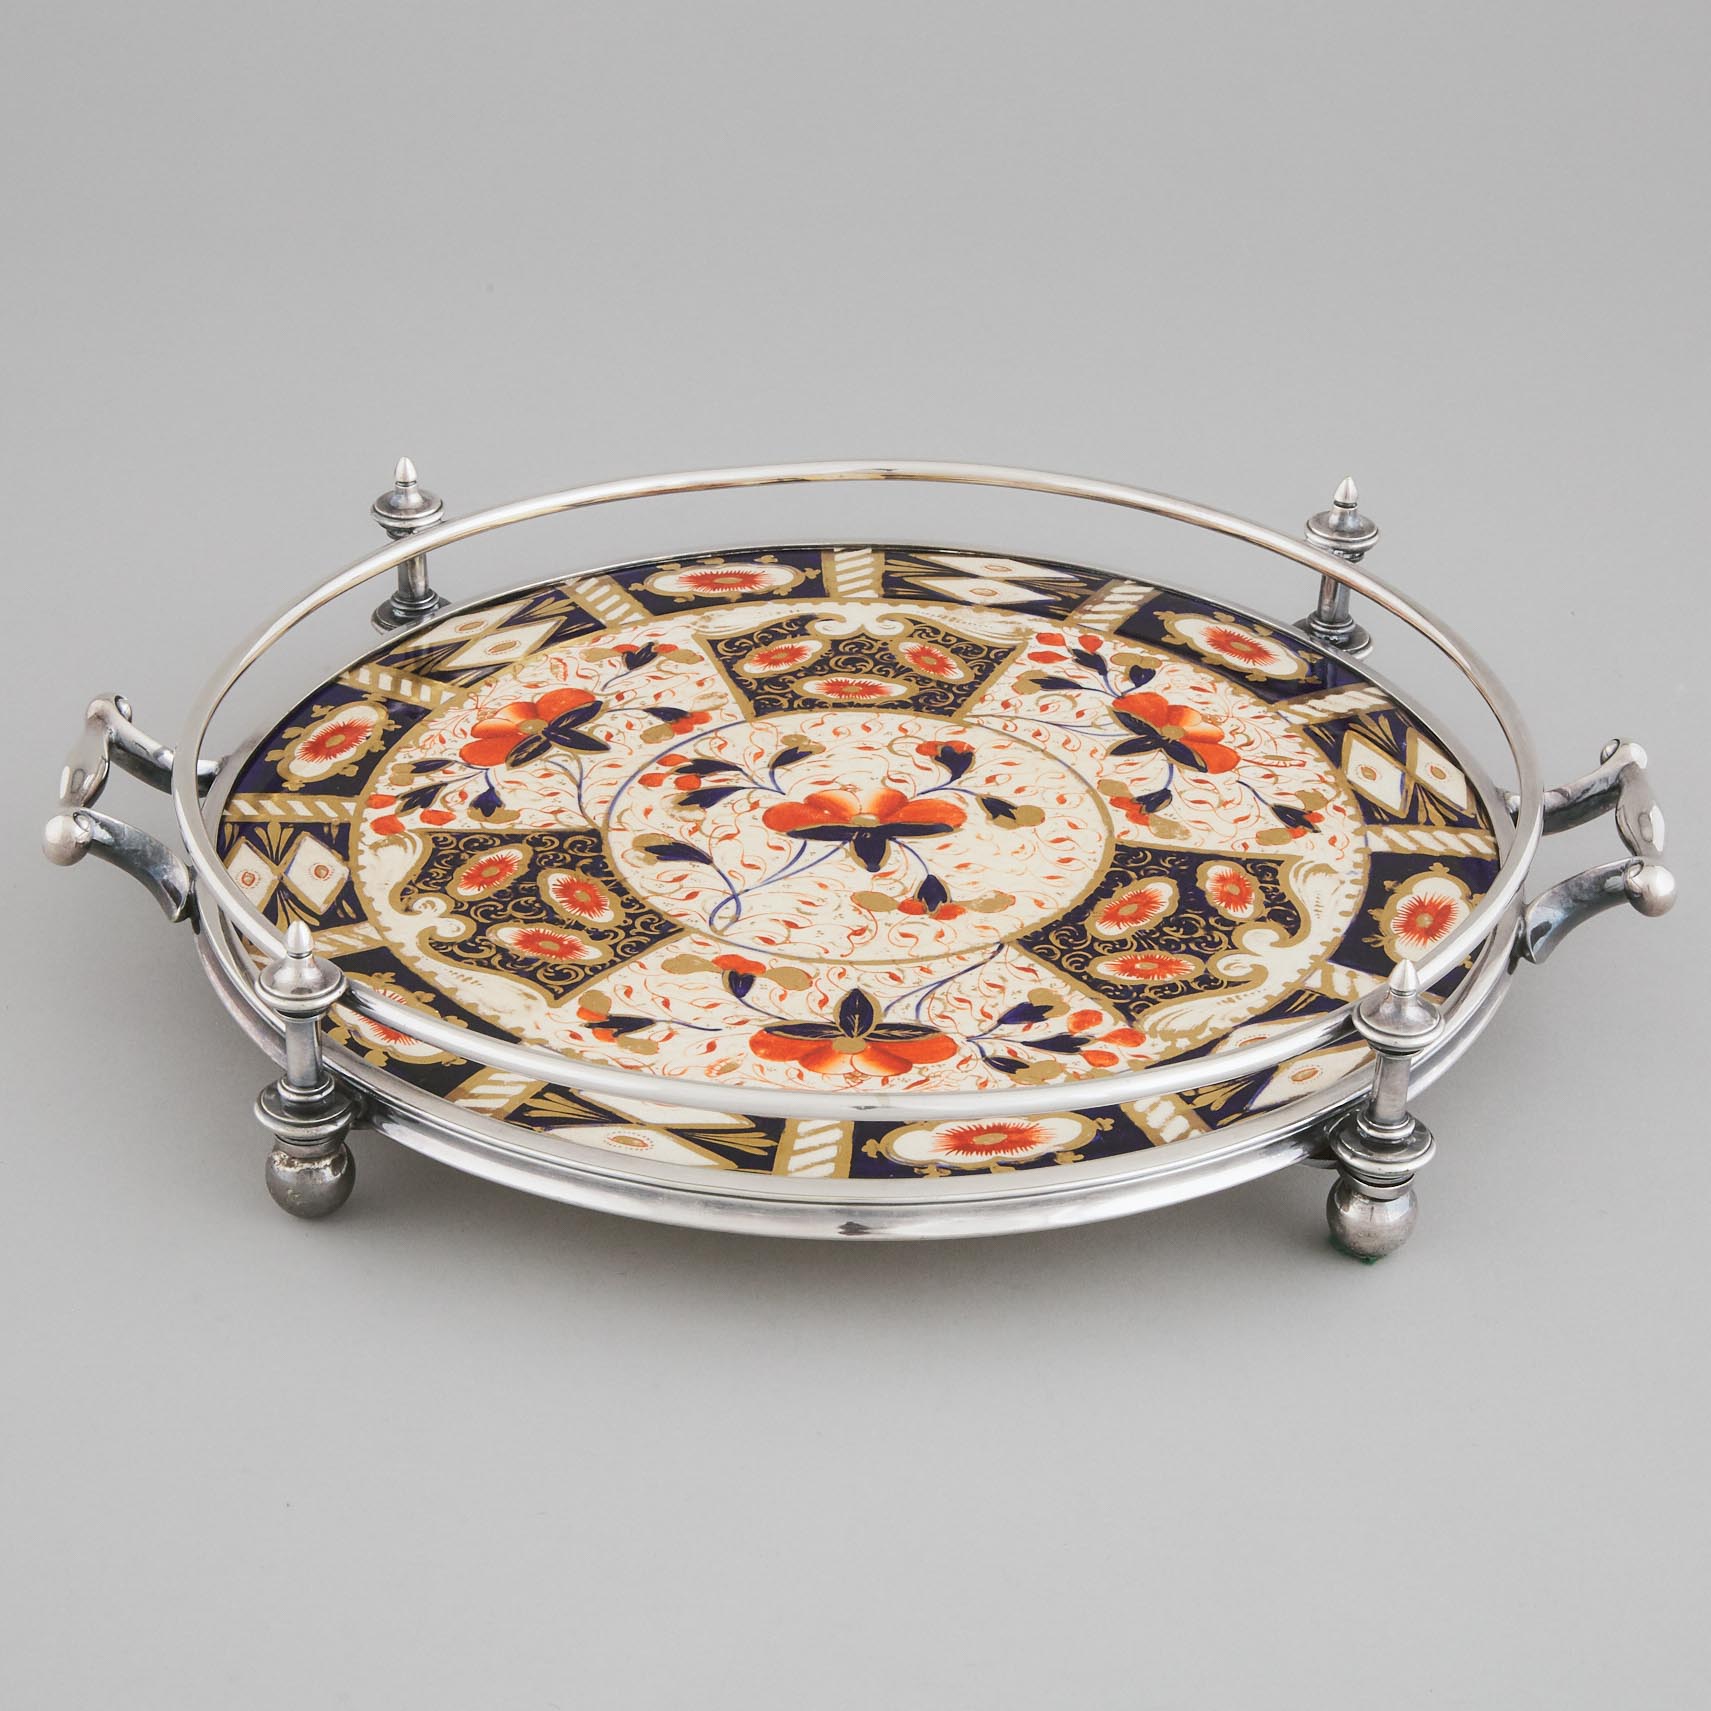 Victorian Silver Plated Circular Galleried Serving Tray, James Dixon & Sons, late 19th century